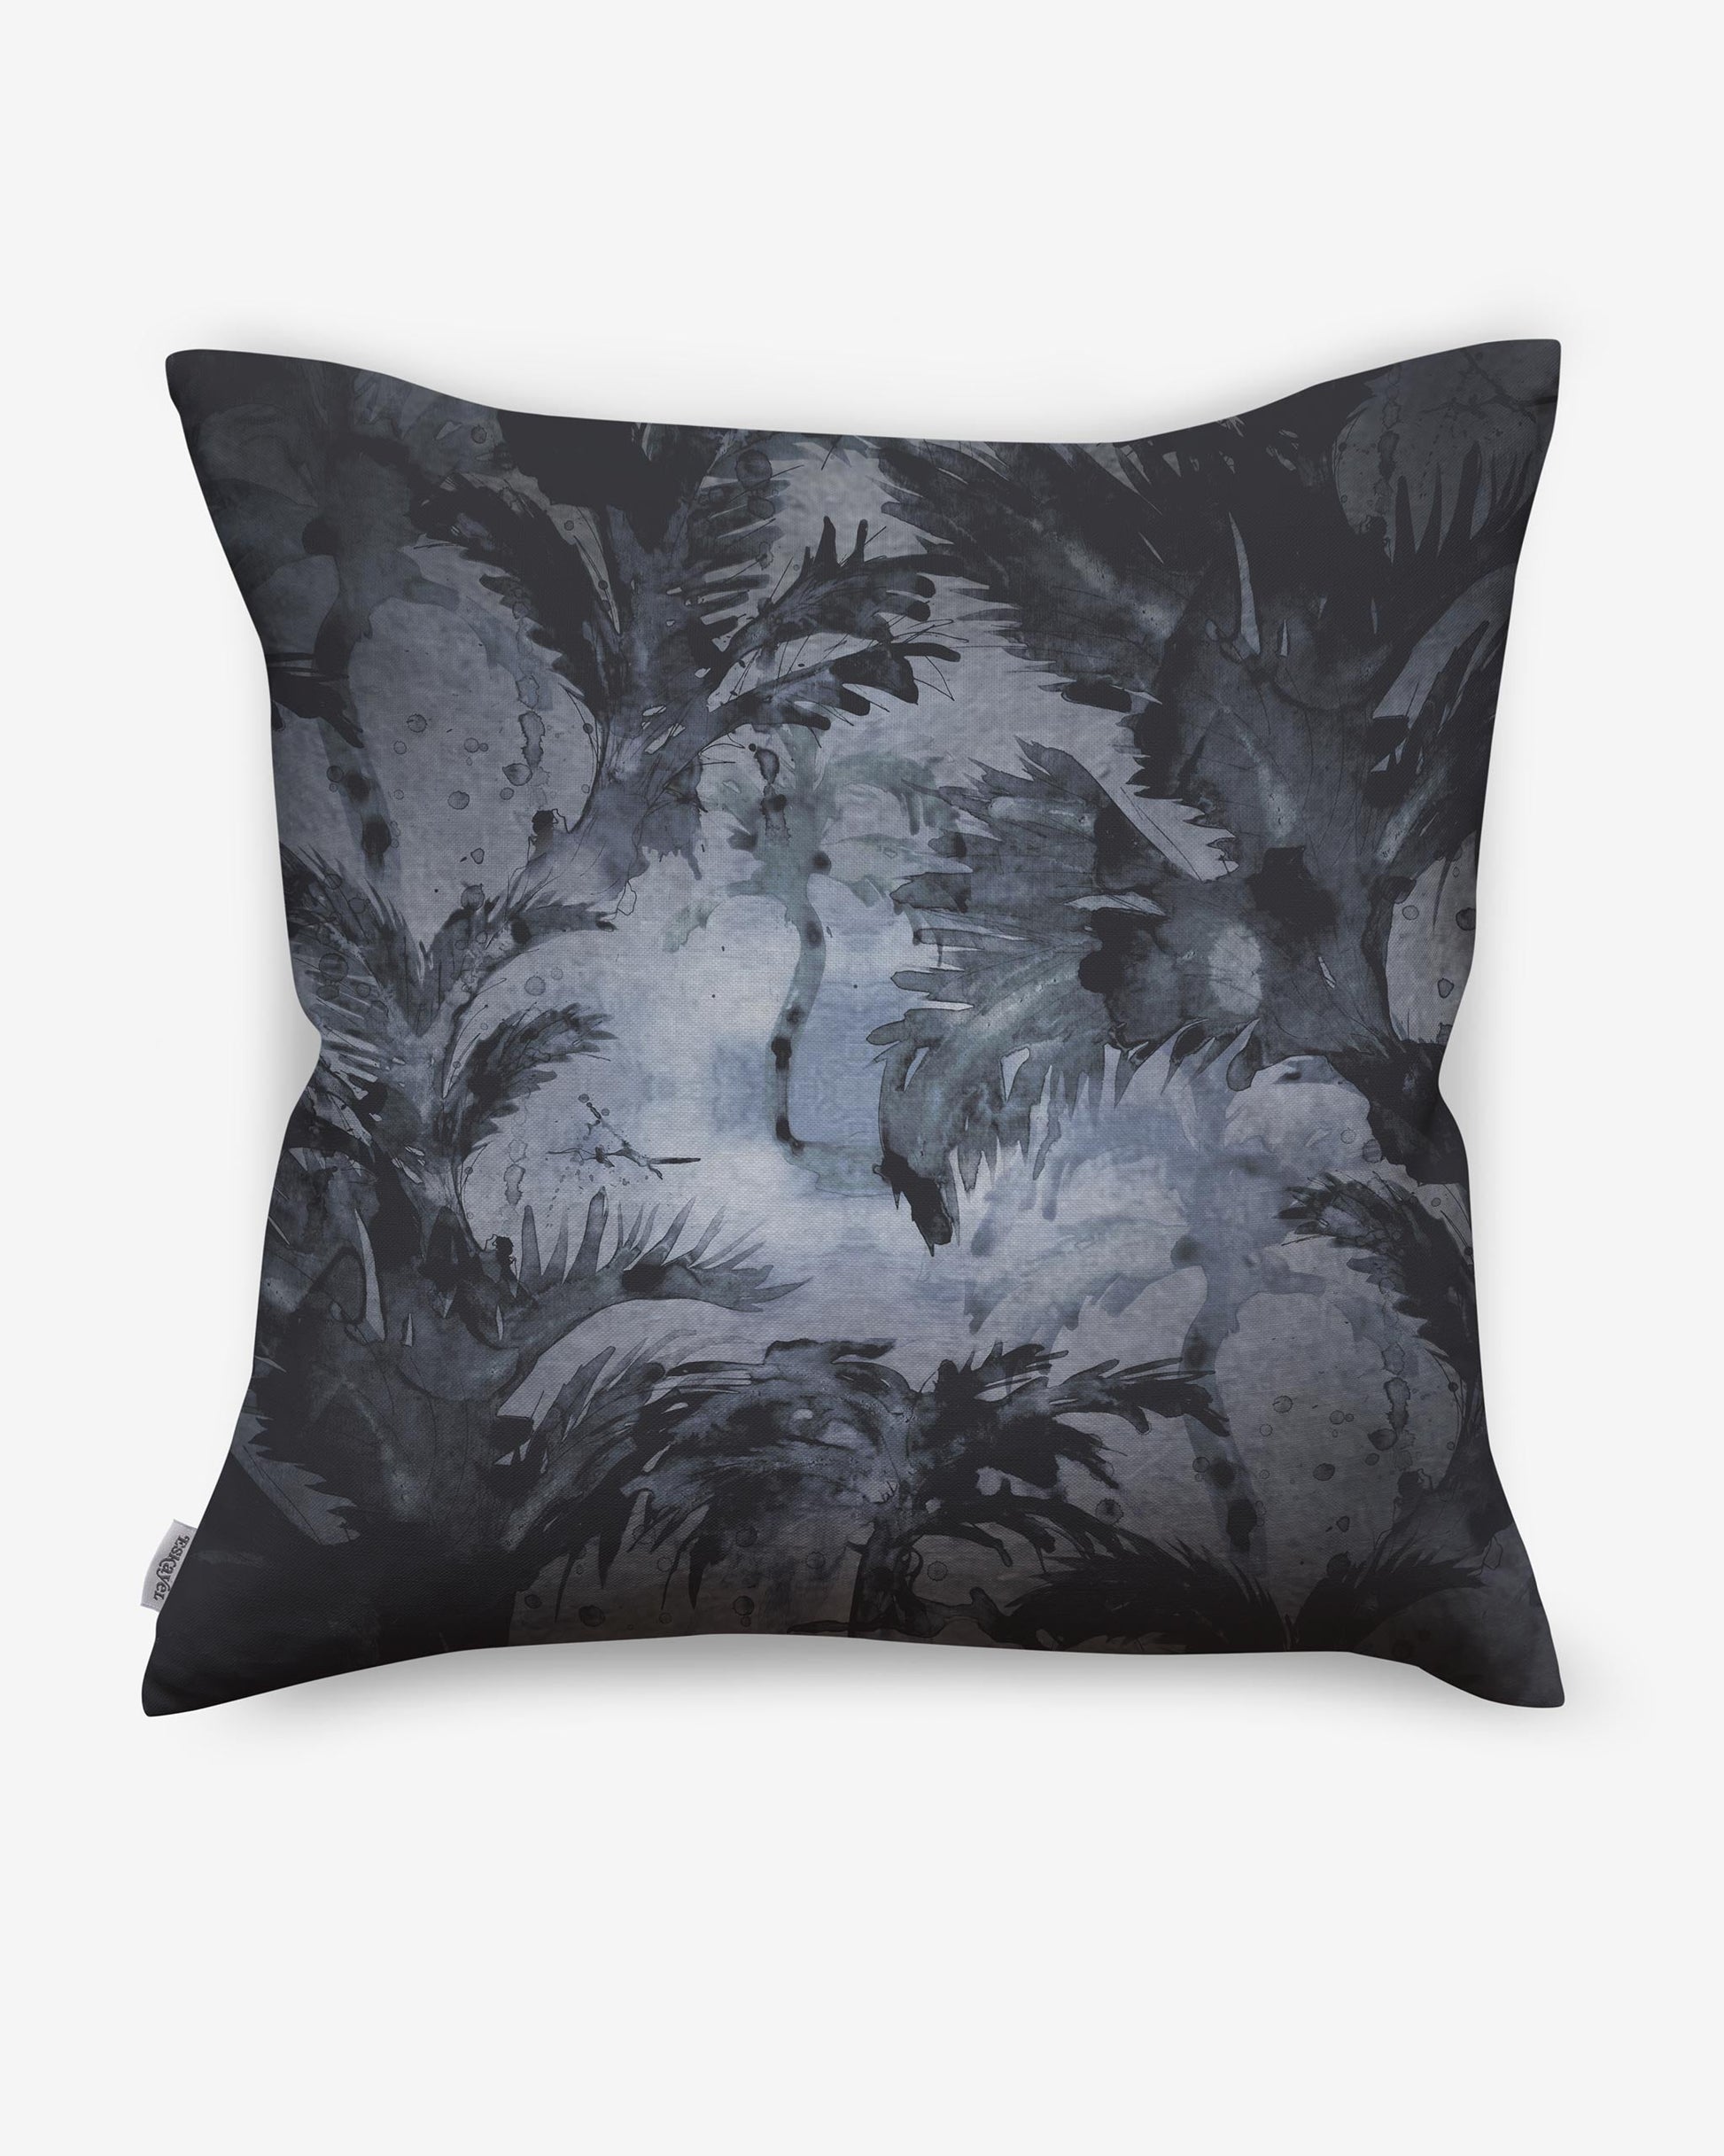 A Cocos Pillow Midnight with a black and white painting featuring Cocos palm tree motifs on it